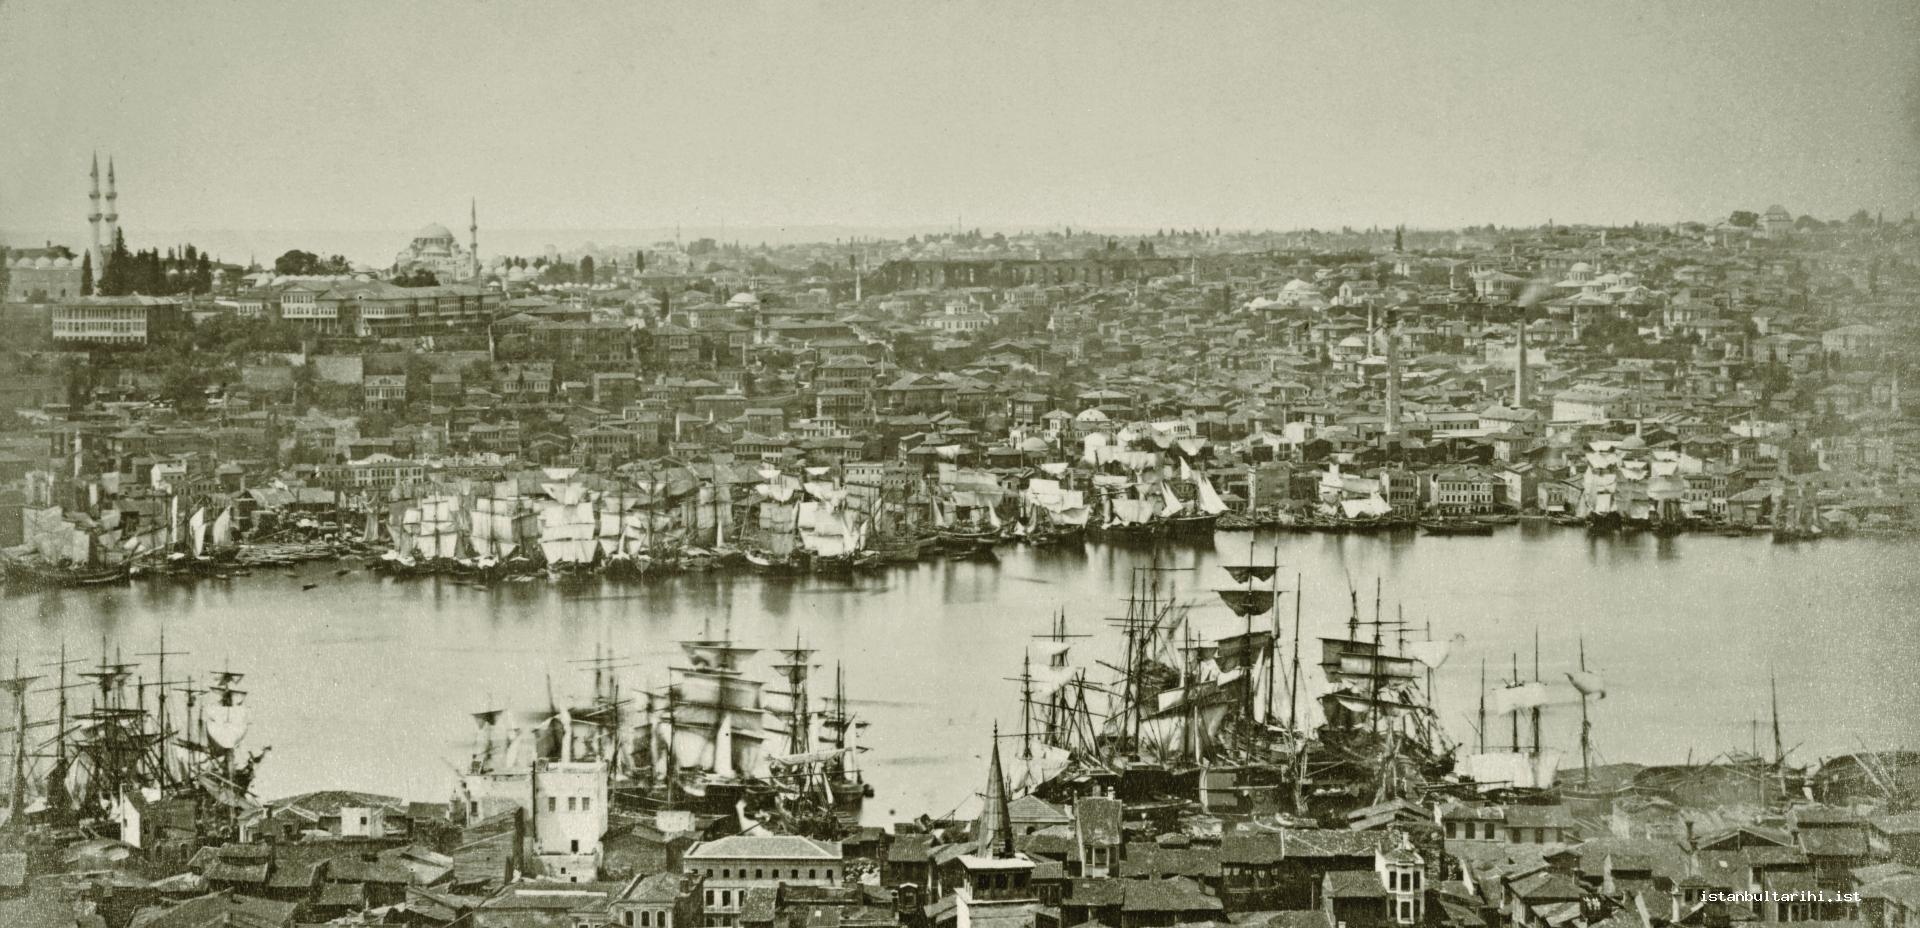 3- The view of Unkapanı and its neighborhood at the end of past century